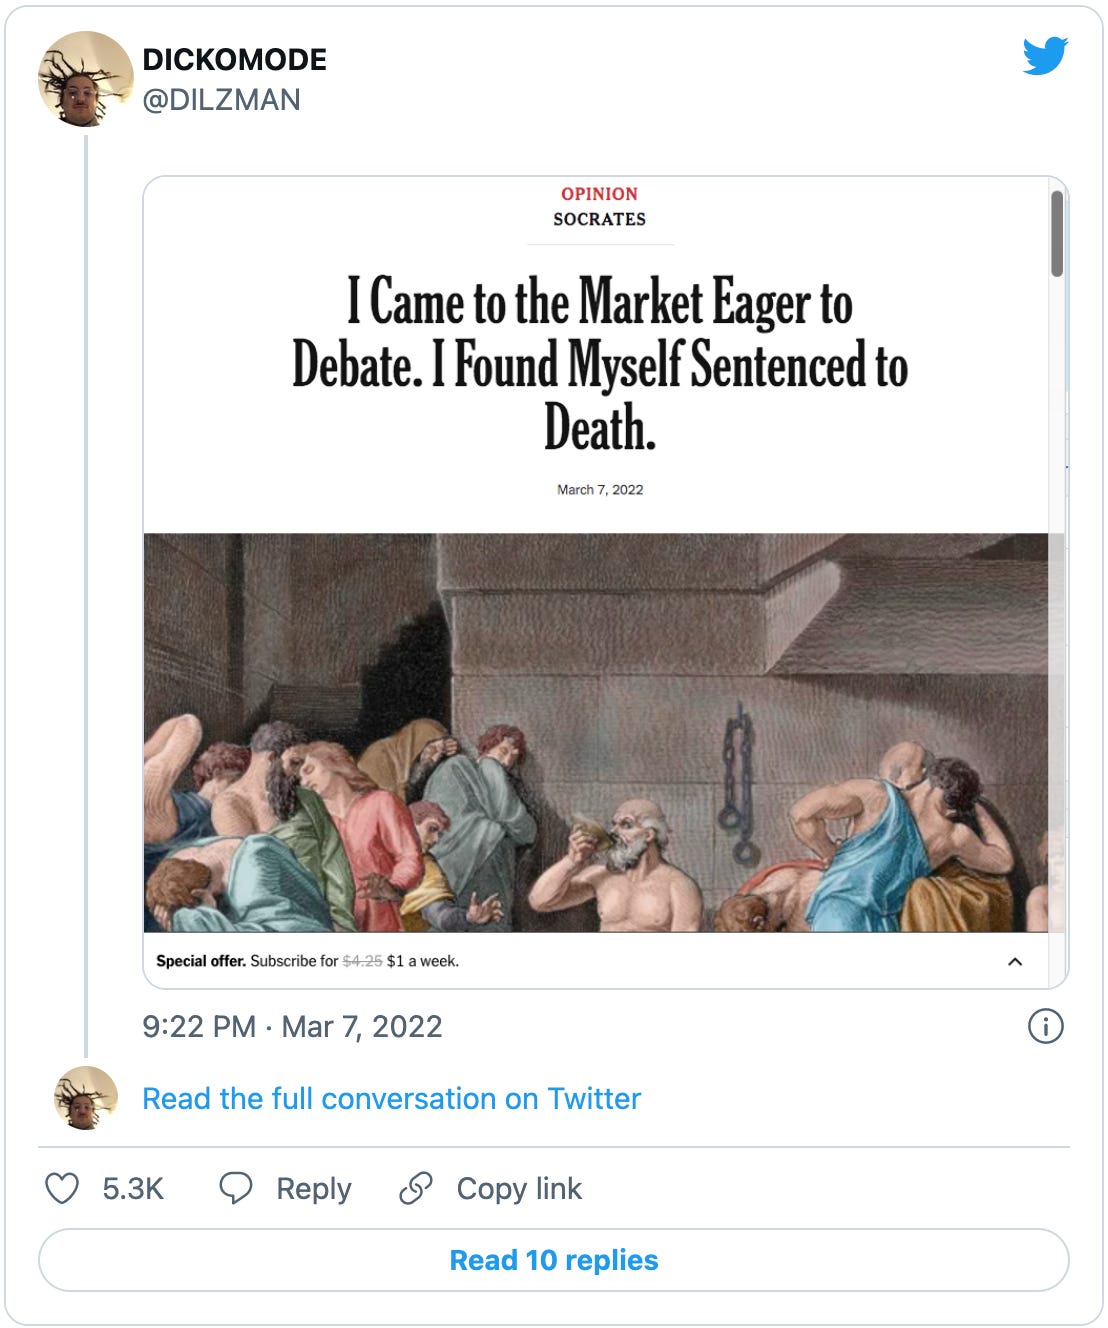 Tweet from @DILZMAN with an NYT opinion screenshot reading “Opinion, Socrates.I Came to the Market Eager to Debate. I Found Myself Sentenced to Death,” with an illustration of Socrates drinking hemlock.